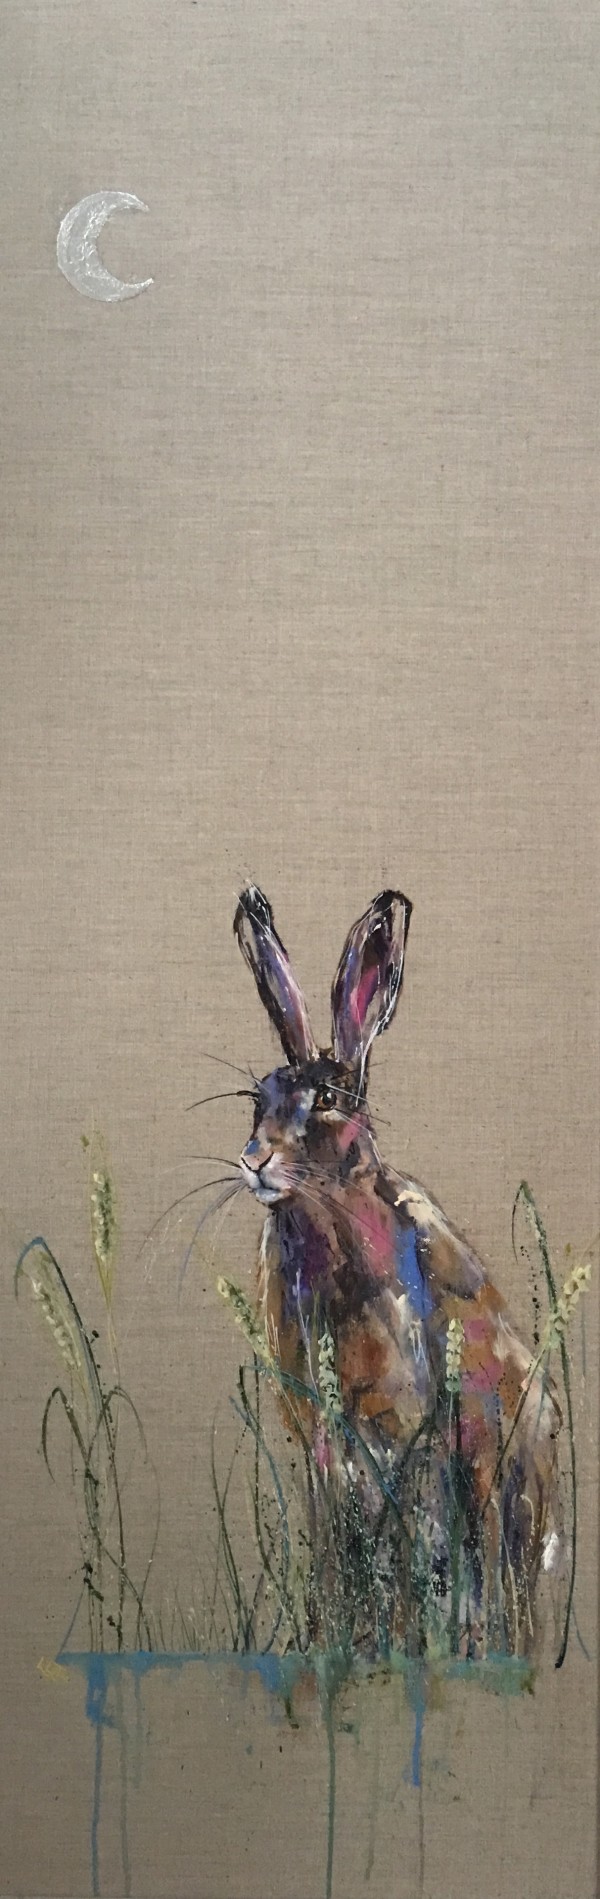 Barley Hare by Louise Luton